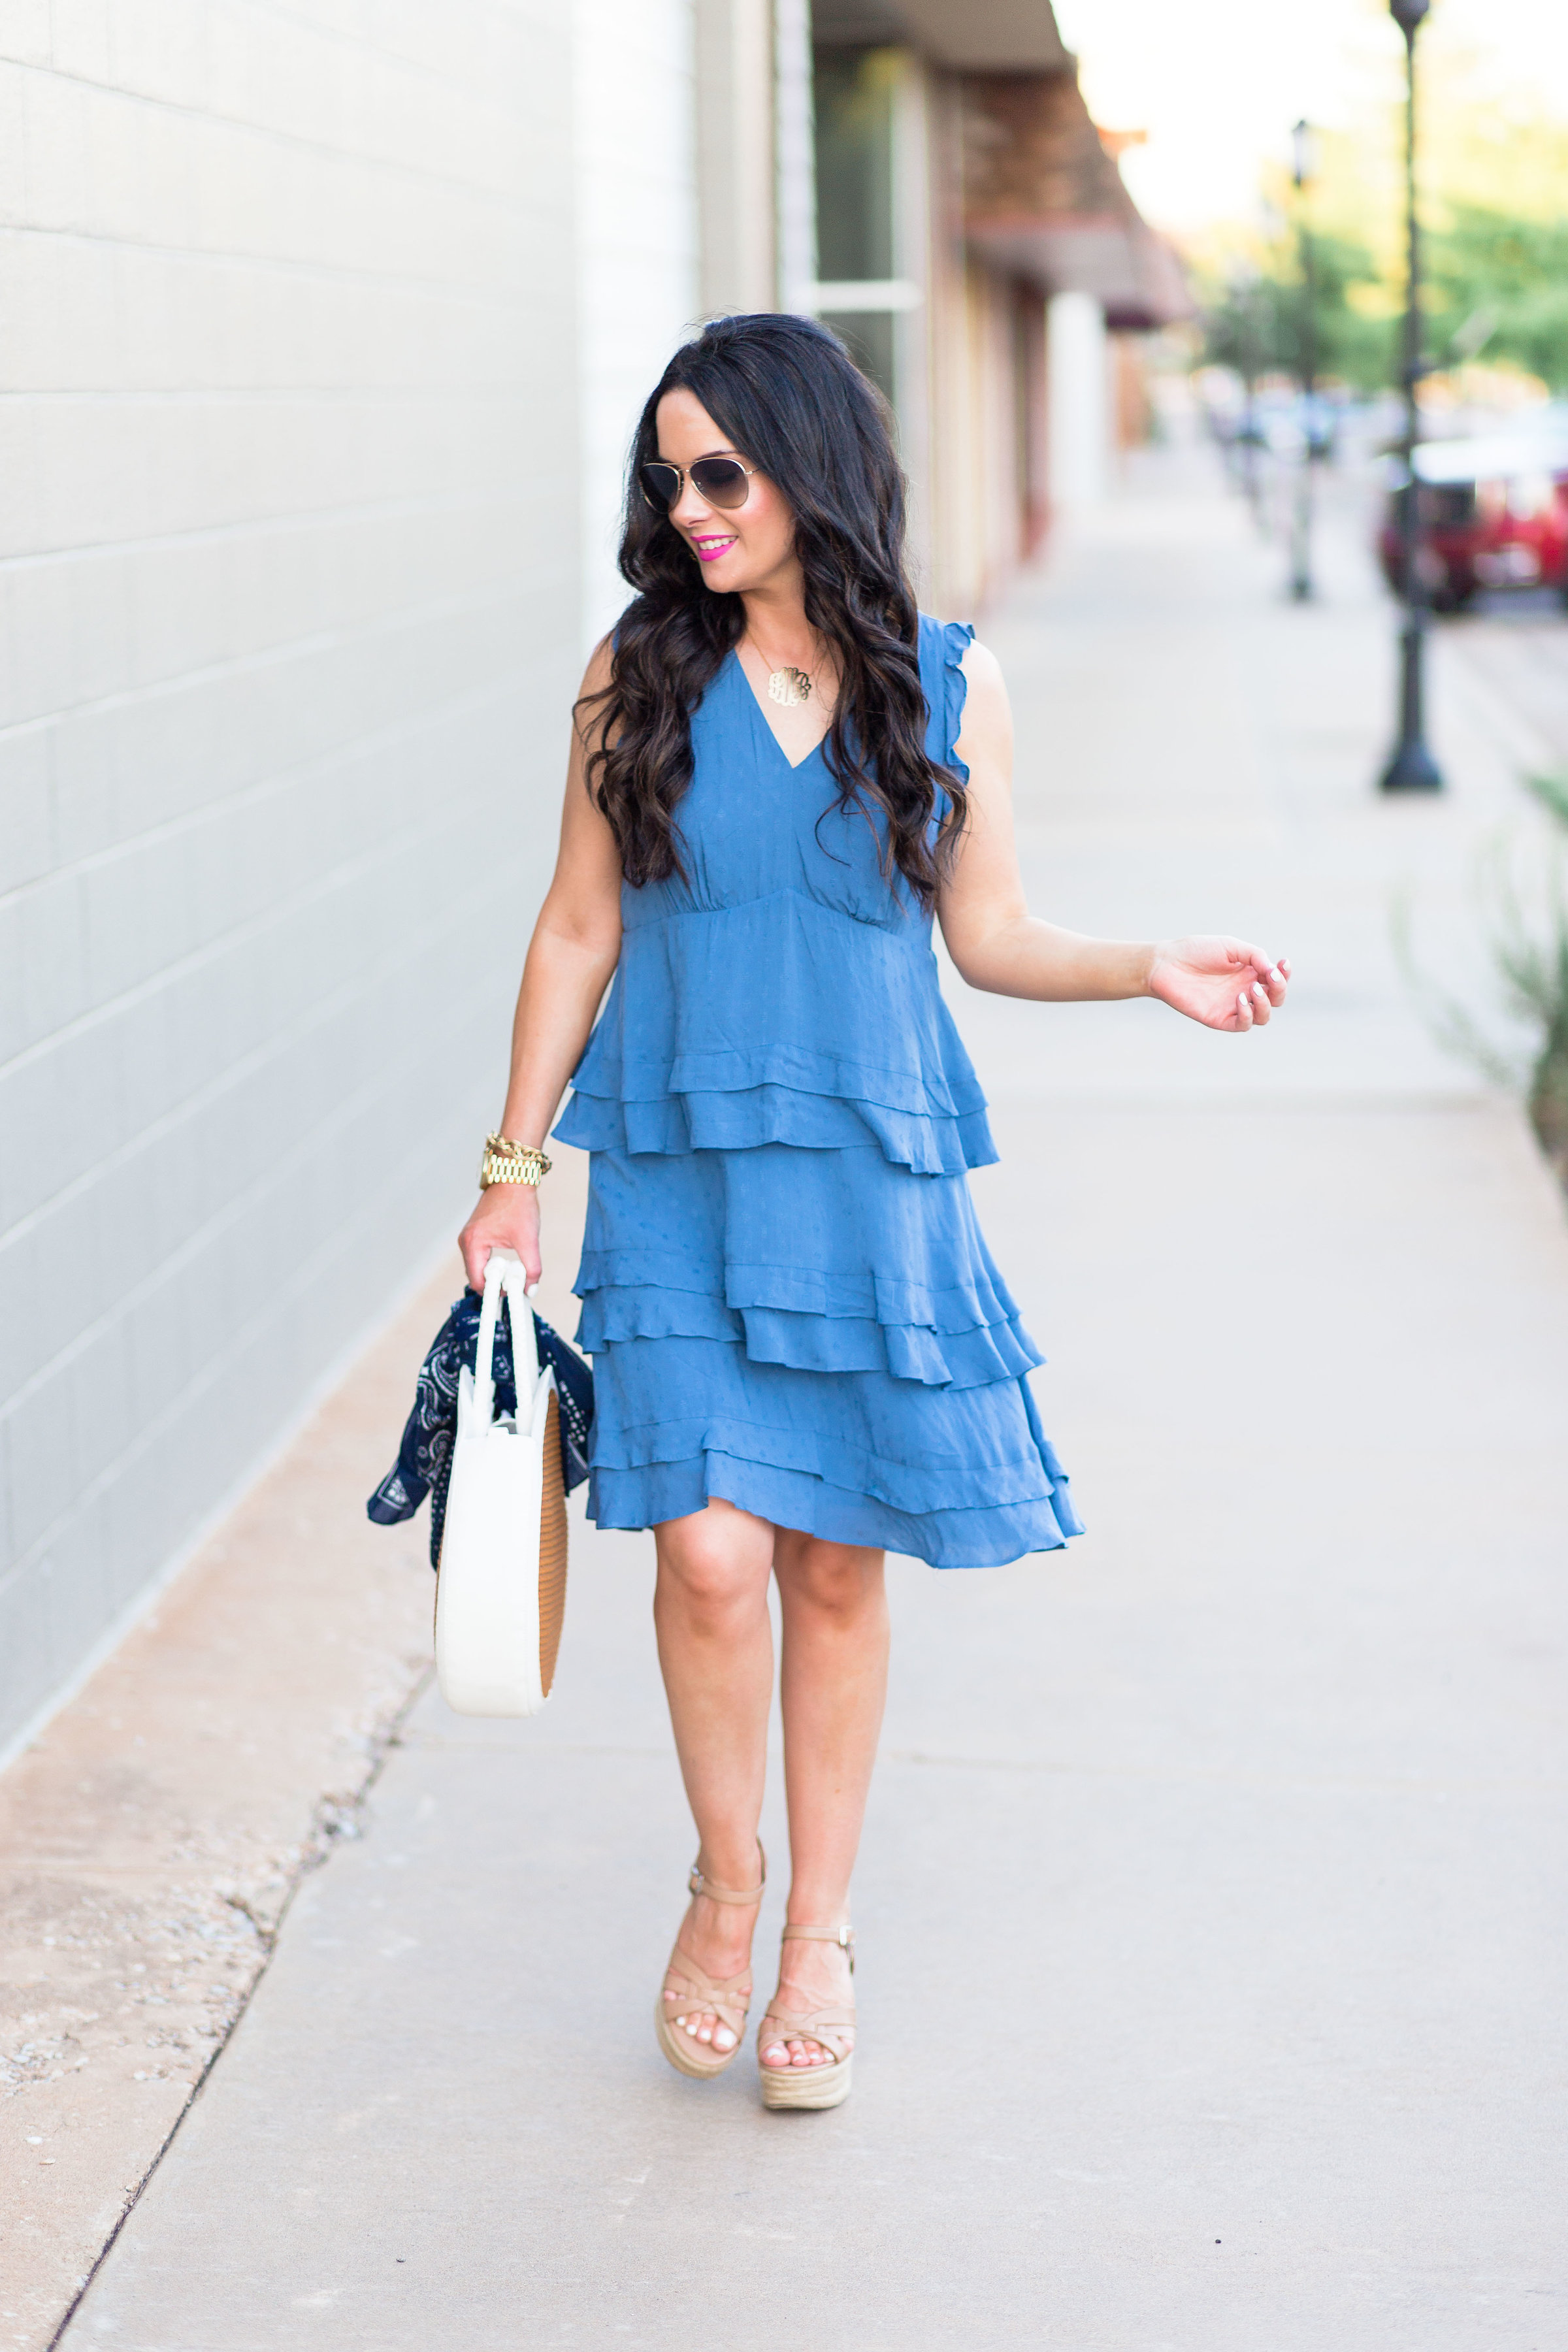 cececece-blue-floral-dresses-summer-style-nordstrom-the-double-take-girls-blogblue-floral-dresses-summer-style-nordstrom-the-double-take-girls-blog